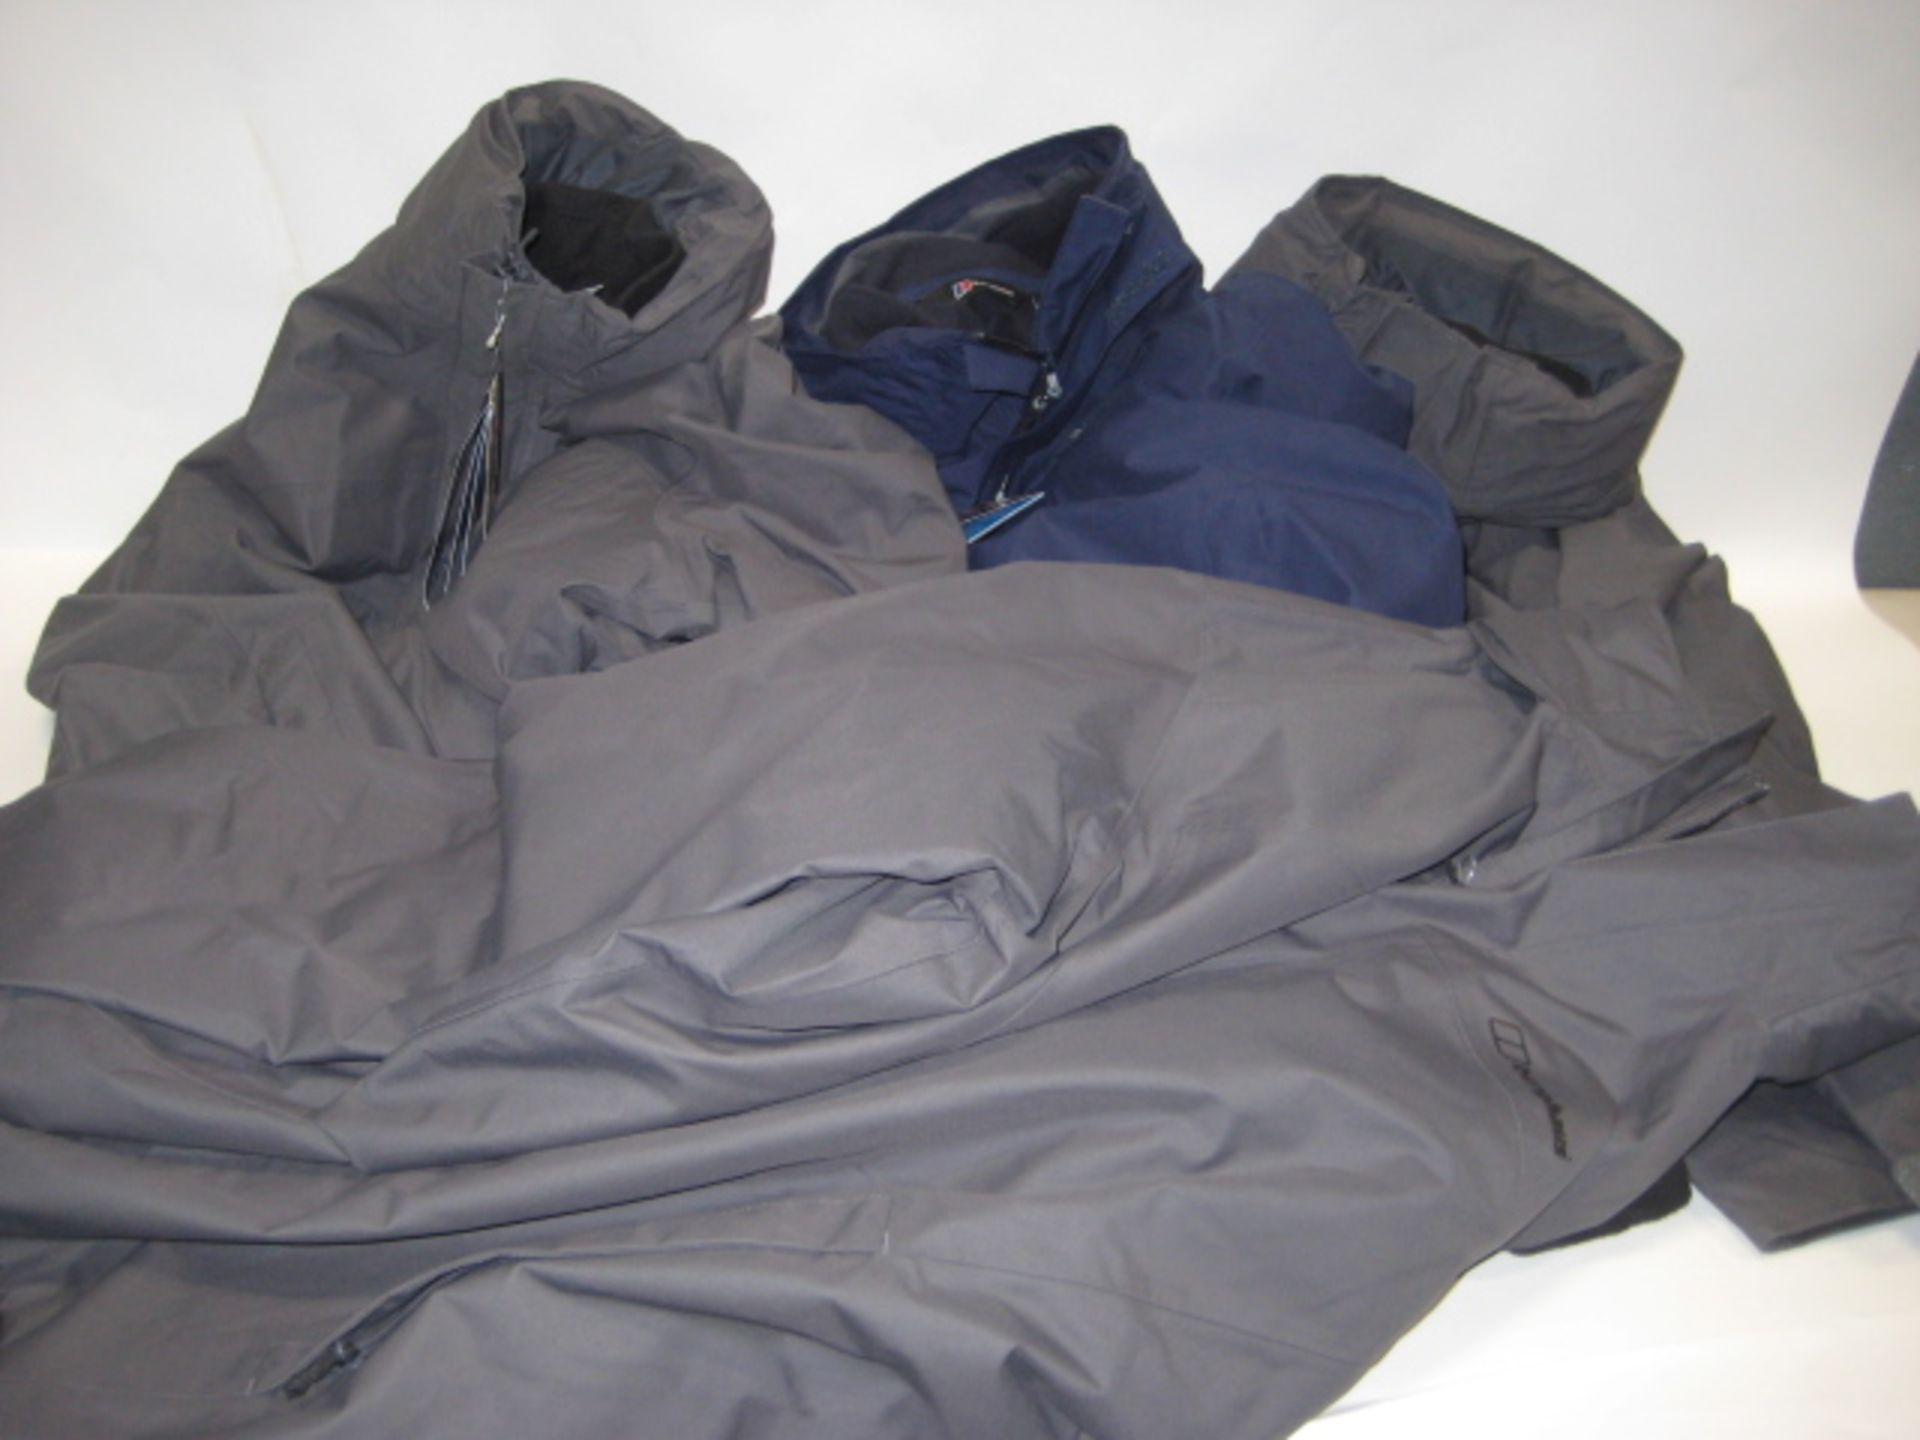 Four Berghaus jackets, 3 in grey 1 in blue all size XXL all tagged model A2 Gemini 3 in 1 jackets